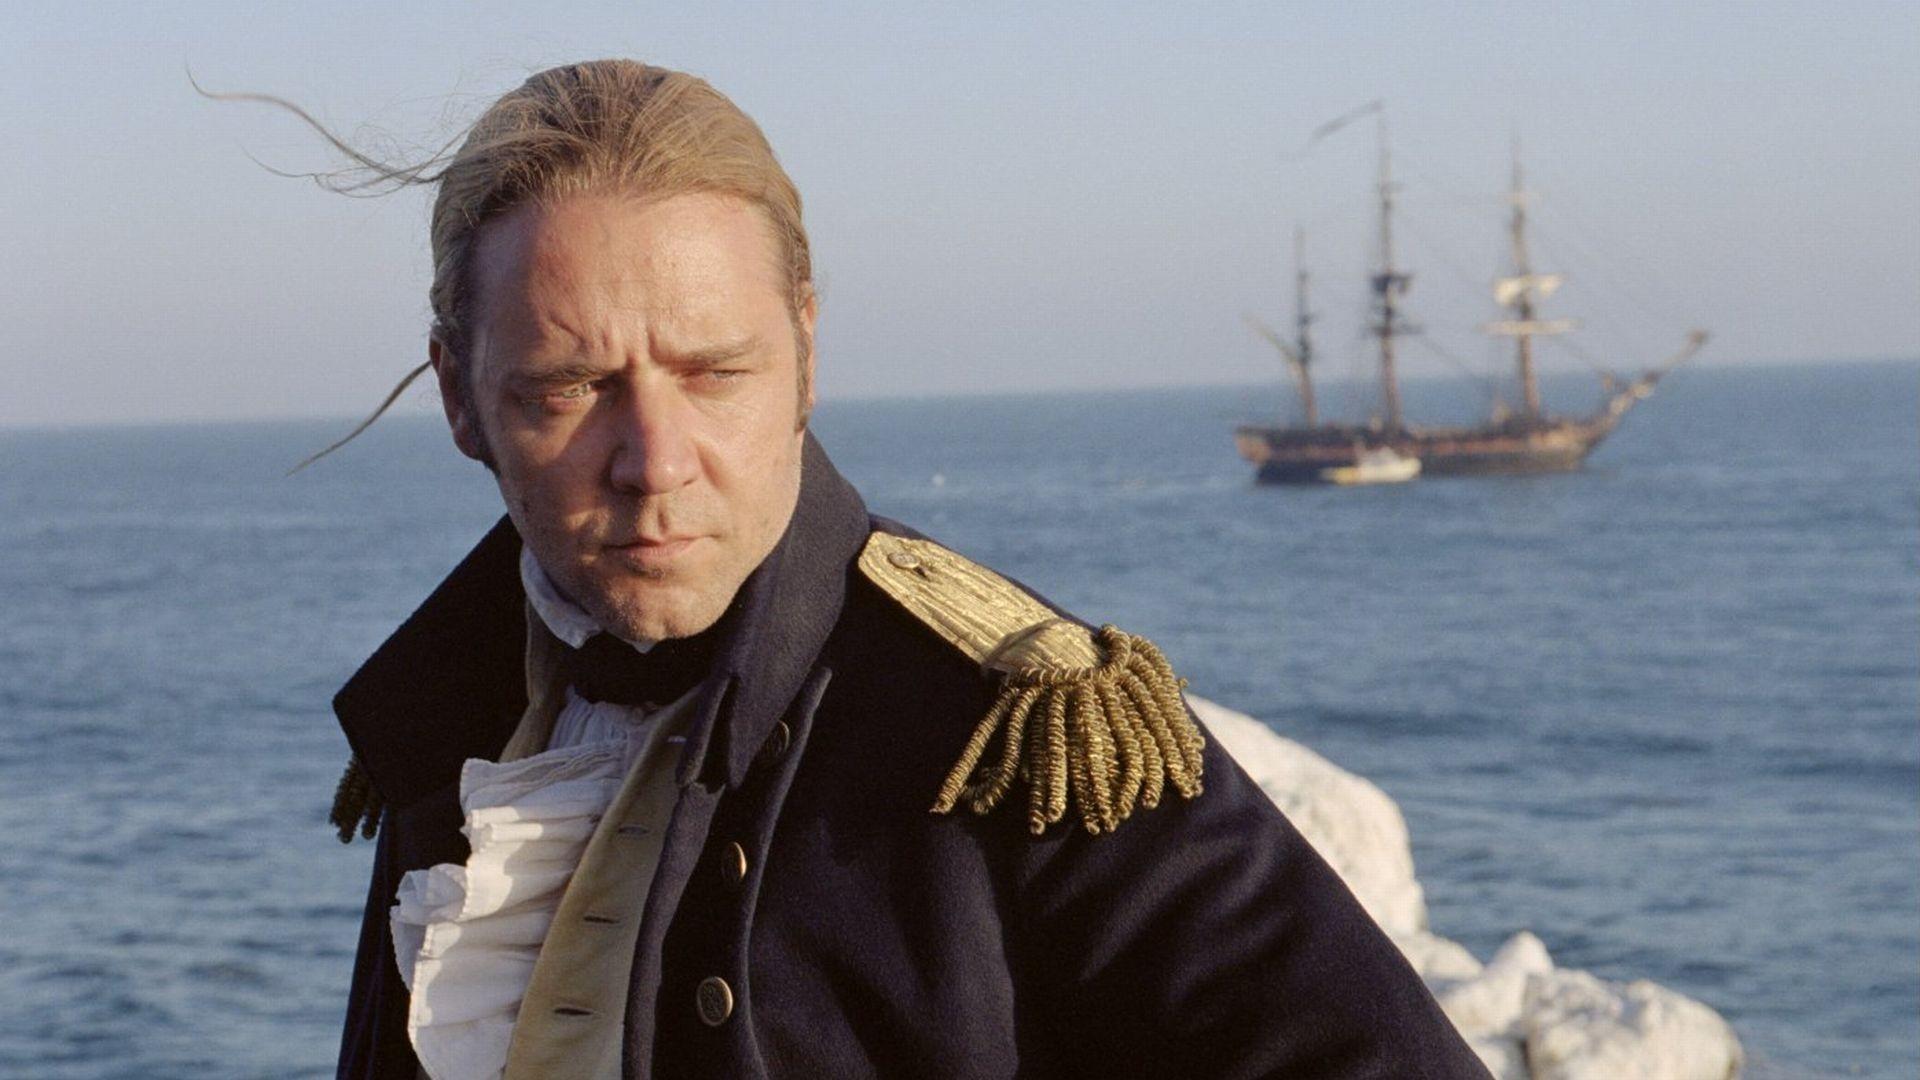 Master and Commander: The Far Side of the World
